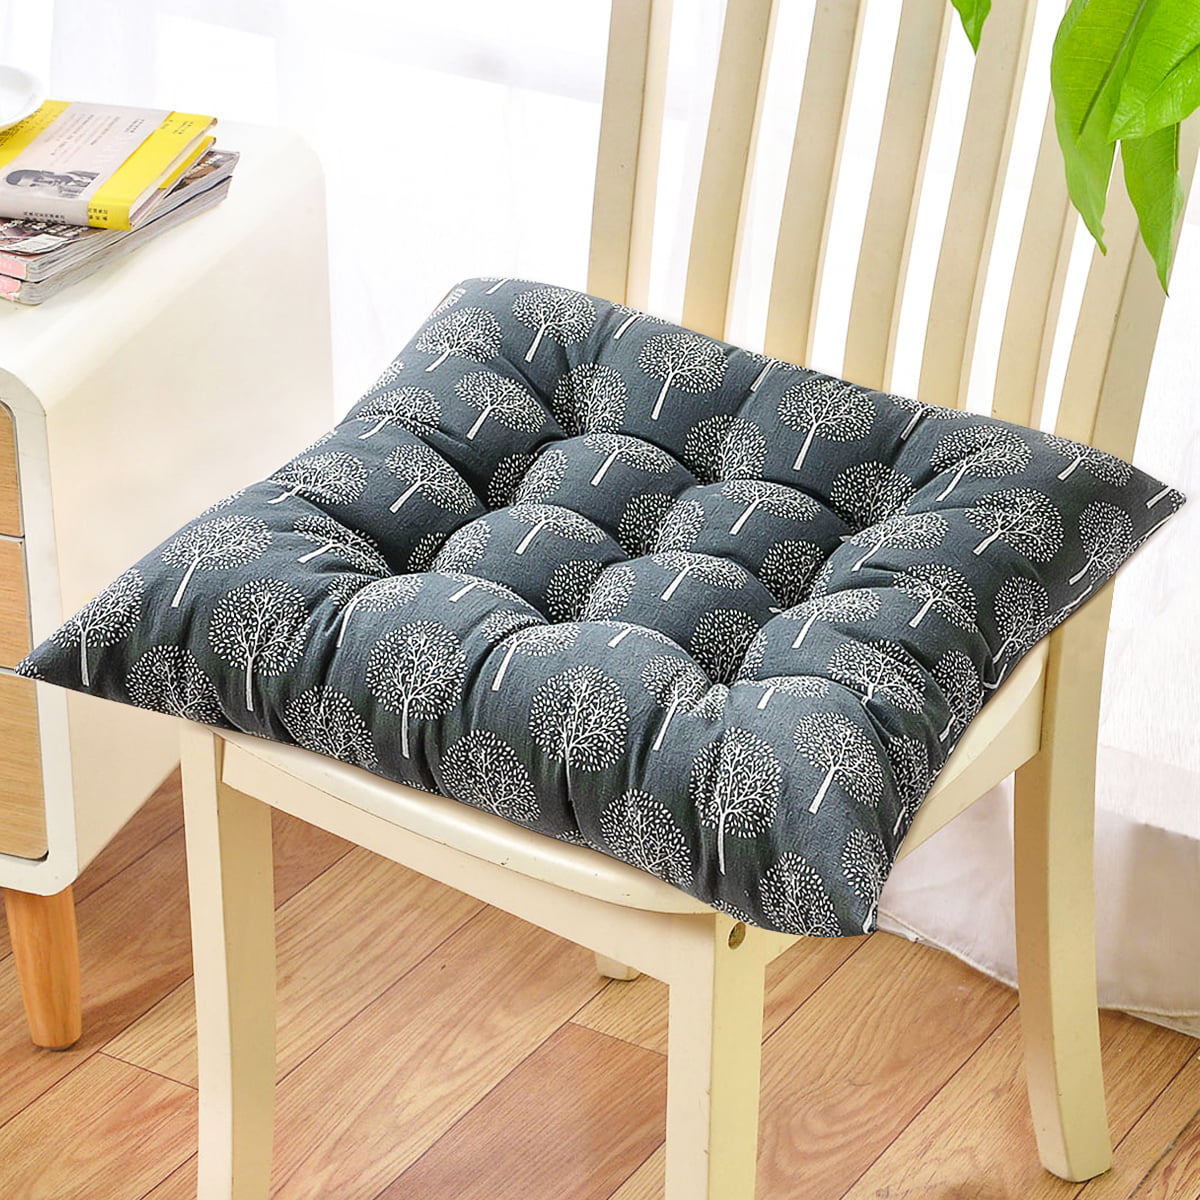 Chair Seat Cotton Cushion Square Soft Thick Pad Padded Home Office Decor 17x17'' 